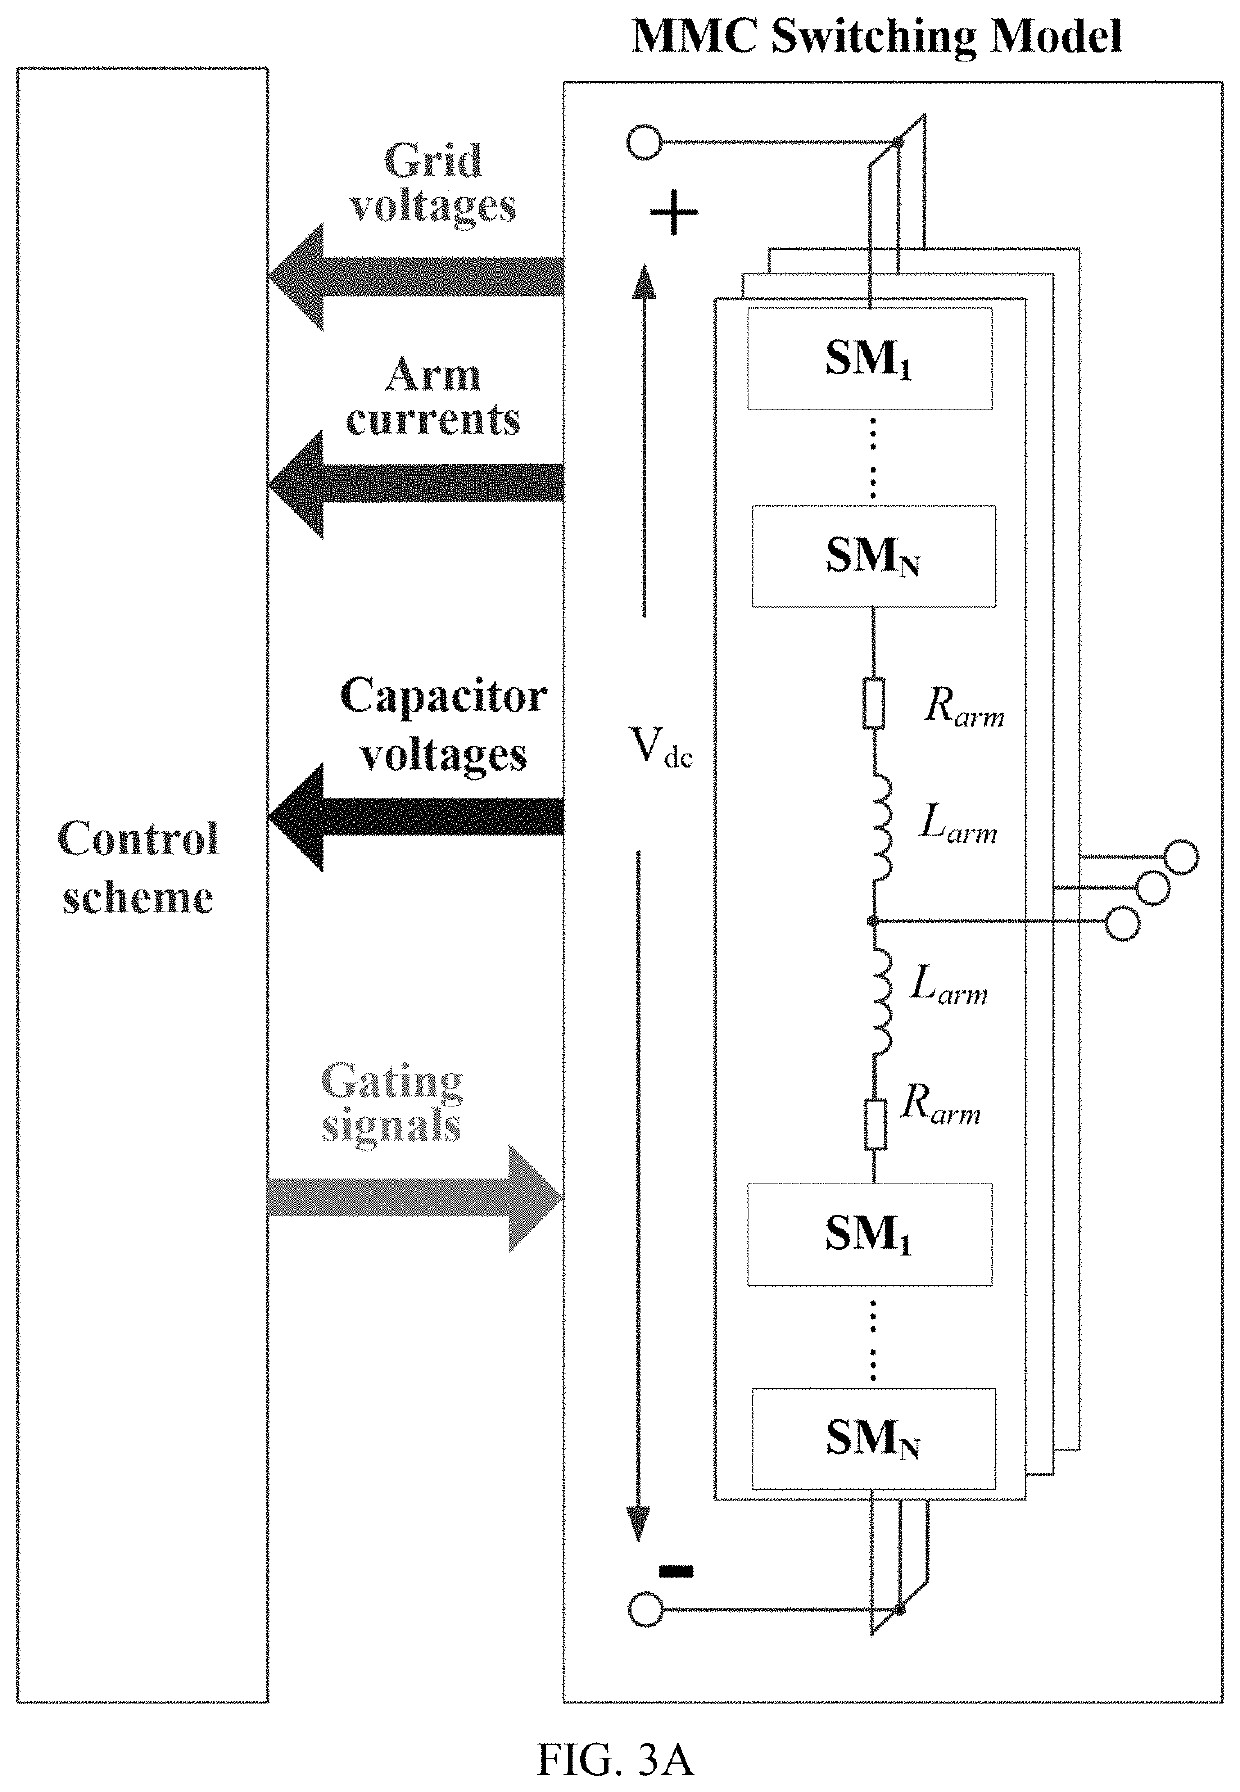 Generalized Equivalent Circuit Model of MMC-HVDC for Power System Simulation